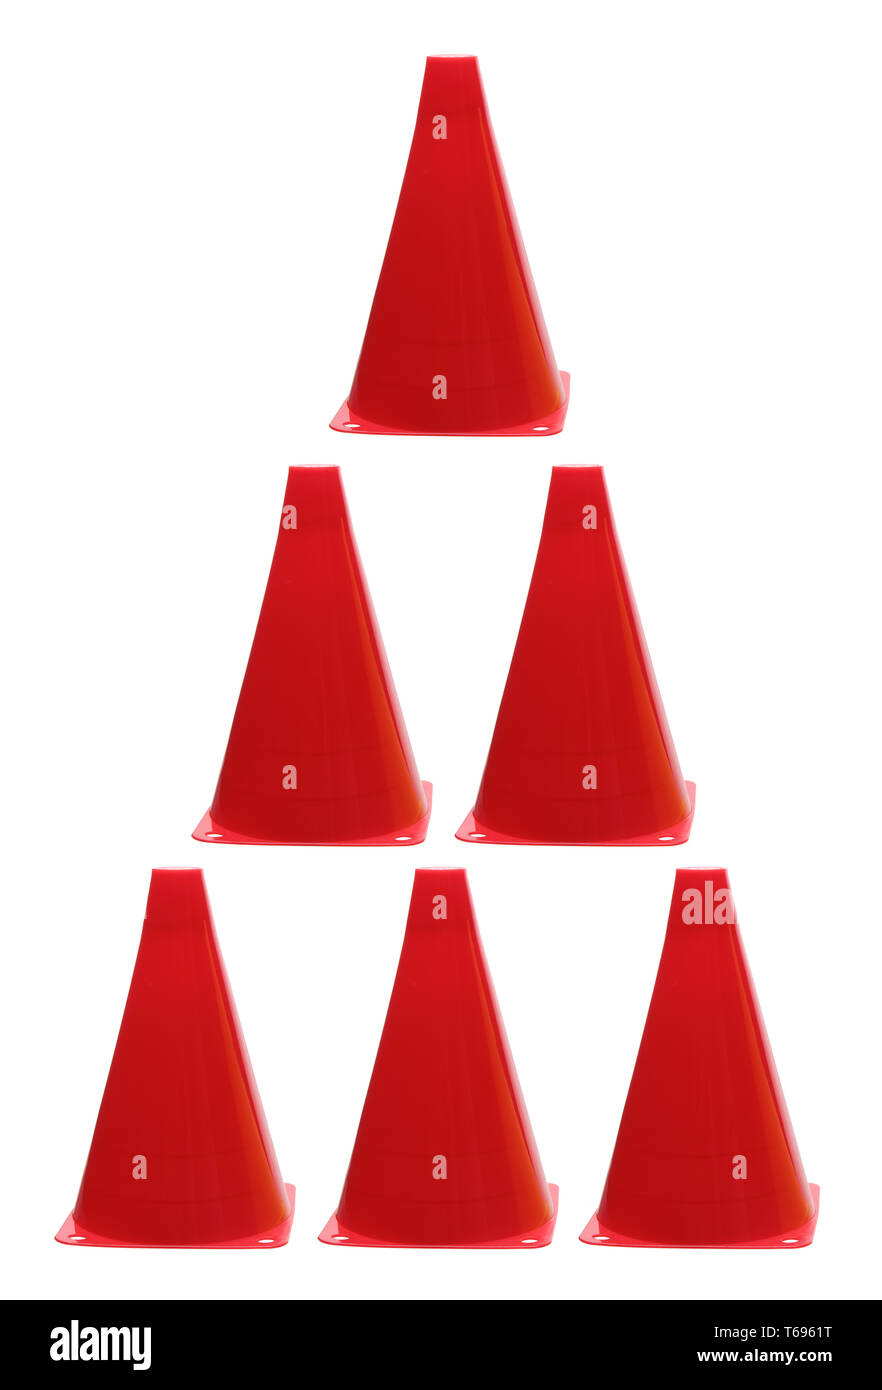 Traffic Cones on White Background Stock Photo